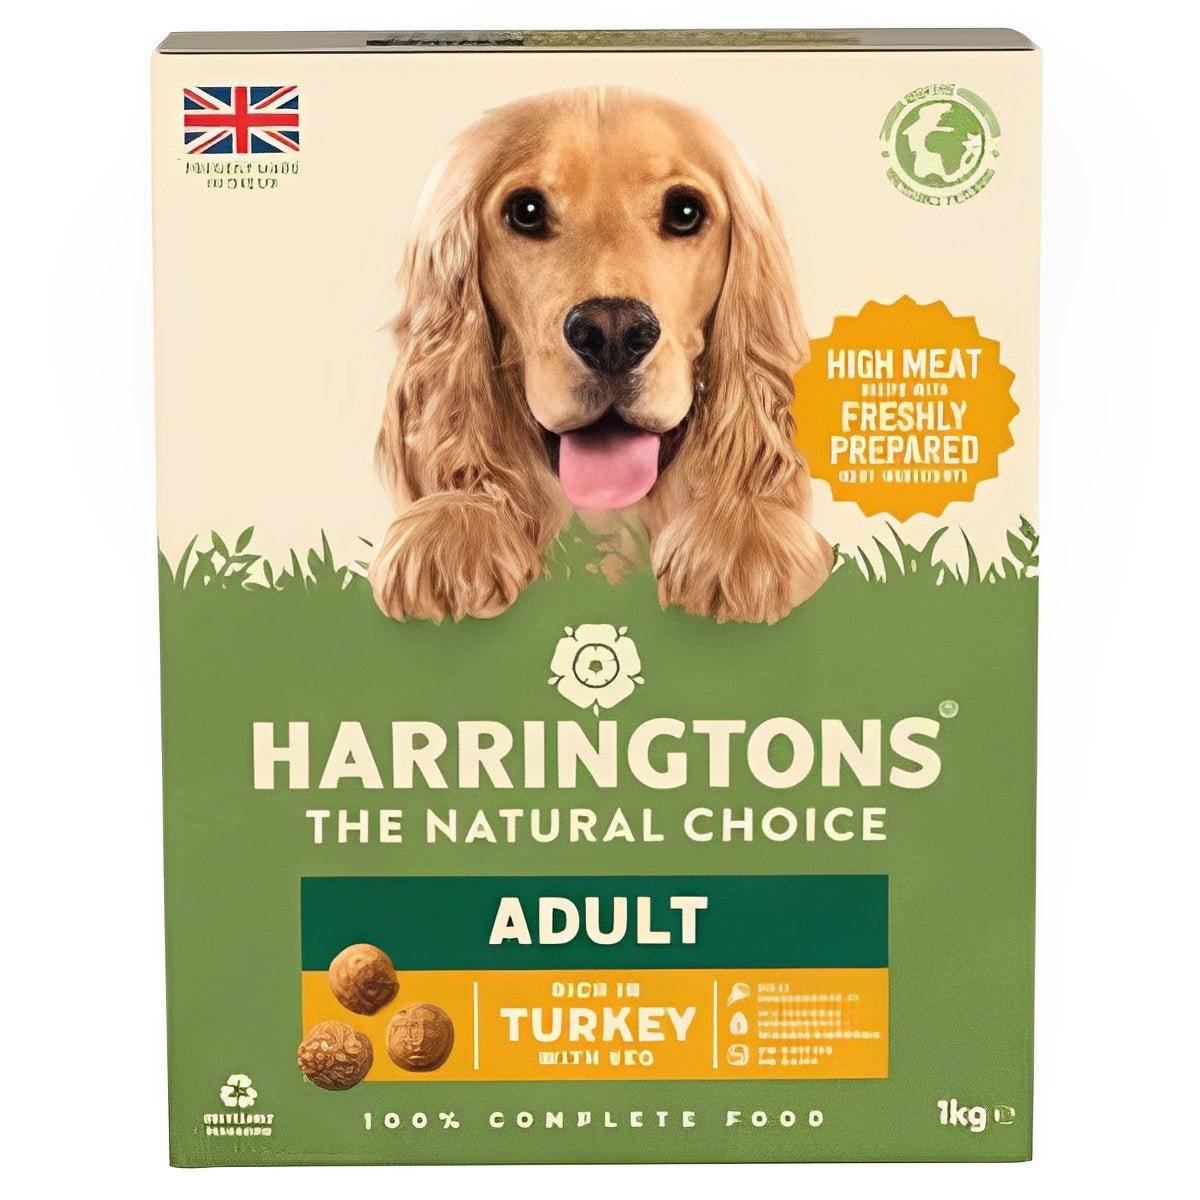 Harringtons - Rich in Turkey with Veg Dry Adult Dog Food - 1kg - Continental Food Store